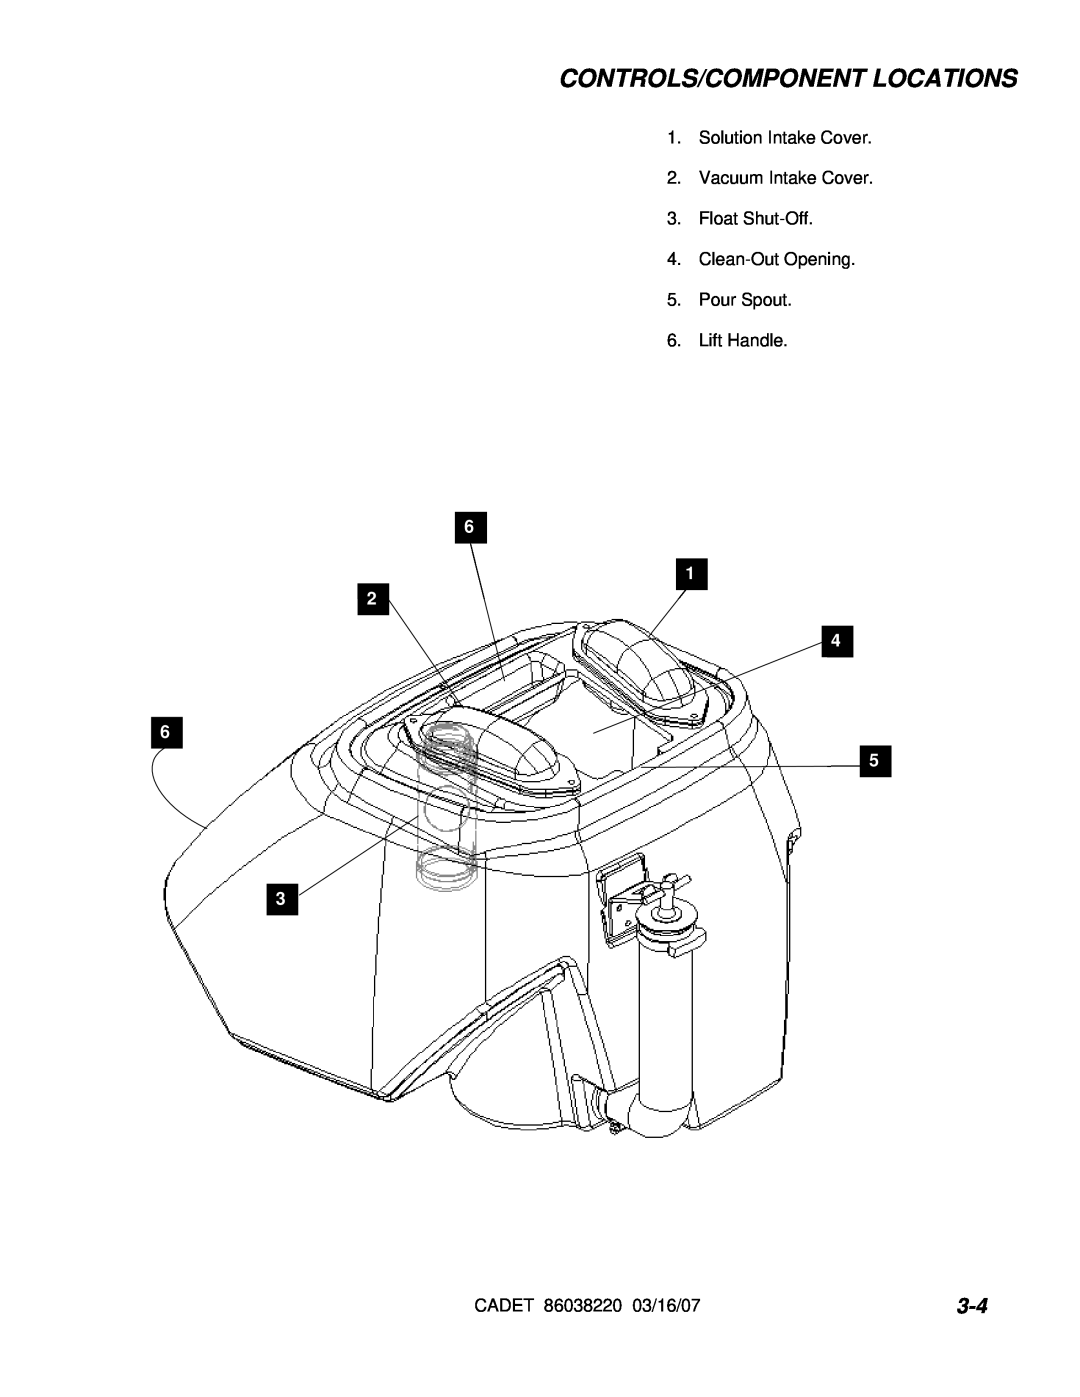 Windsor CDT7 manual Controls/Component Locations, Solution Intake Cover 2.Vacuum Intake Cover, Lift Handle, 6 2 6, 1 4 5 